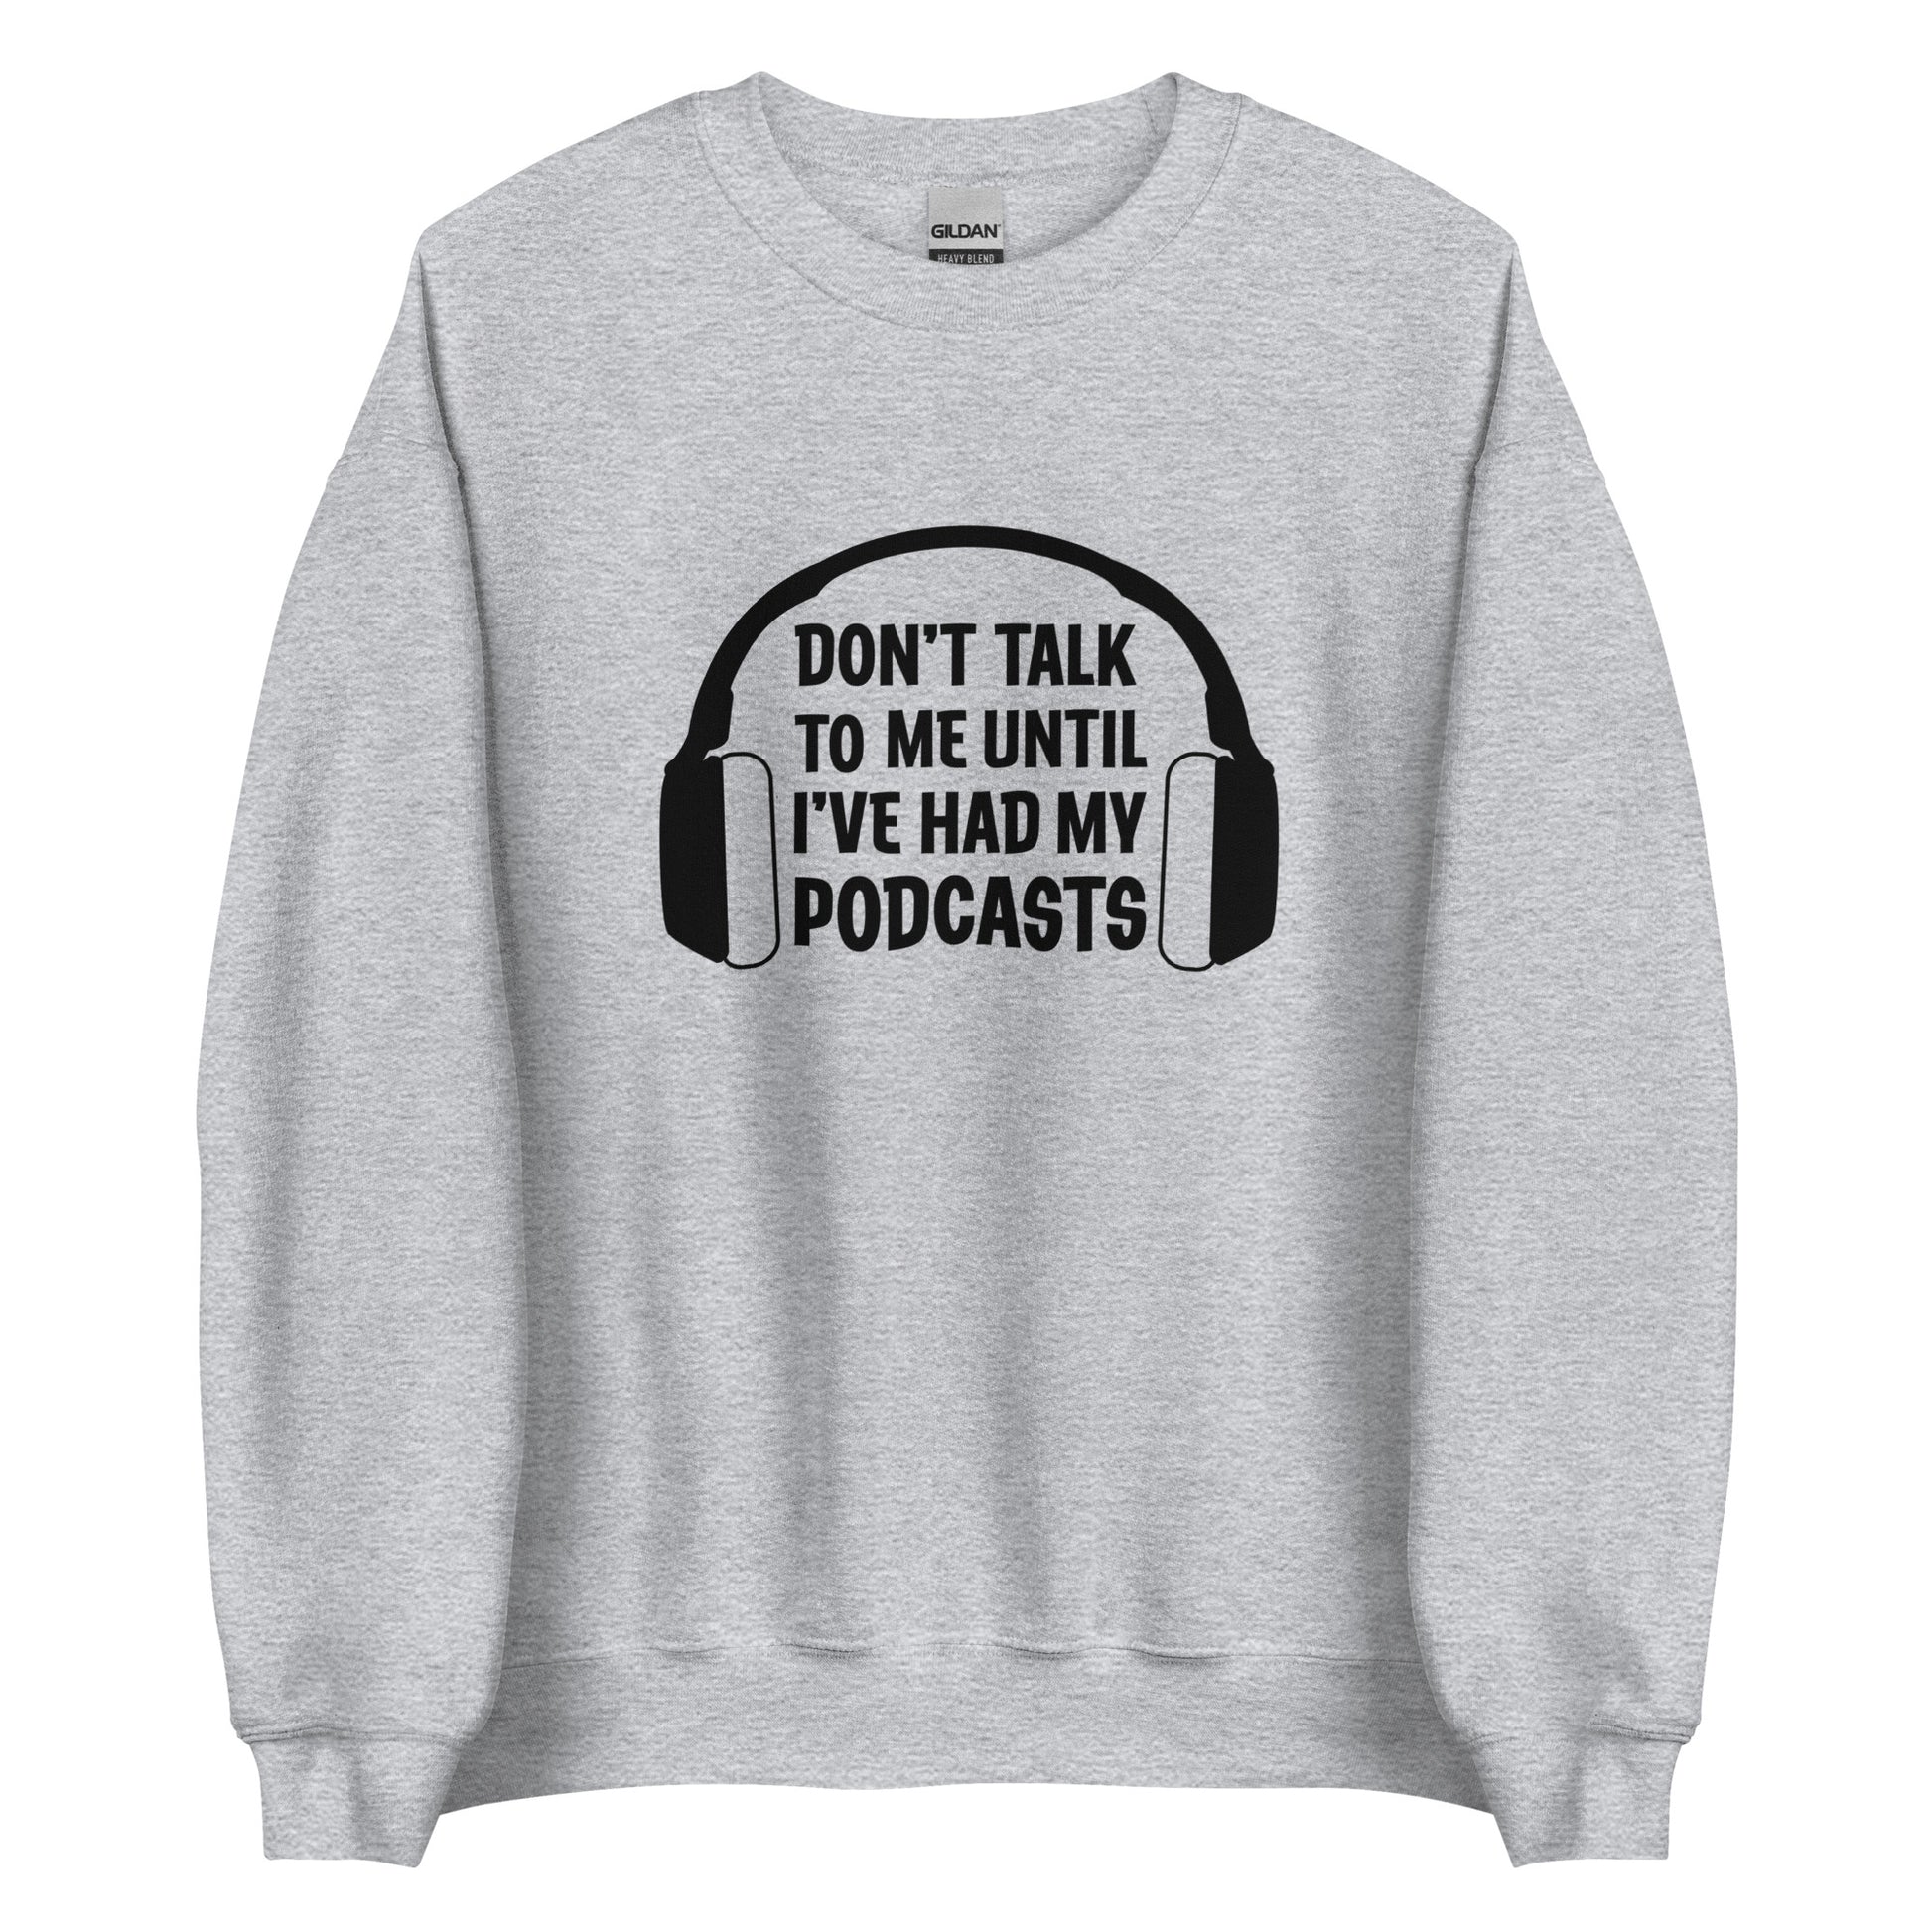 Light gray crewneck sweatshirt with an image of headphones and text reading "Don't talk to me until I've had my podcasts"